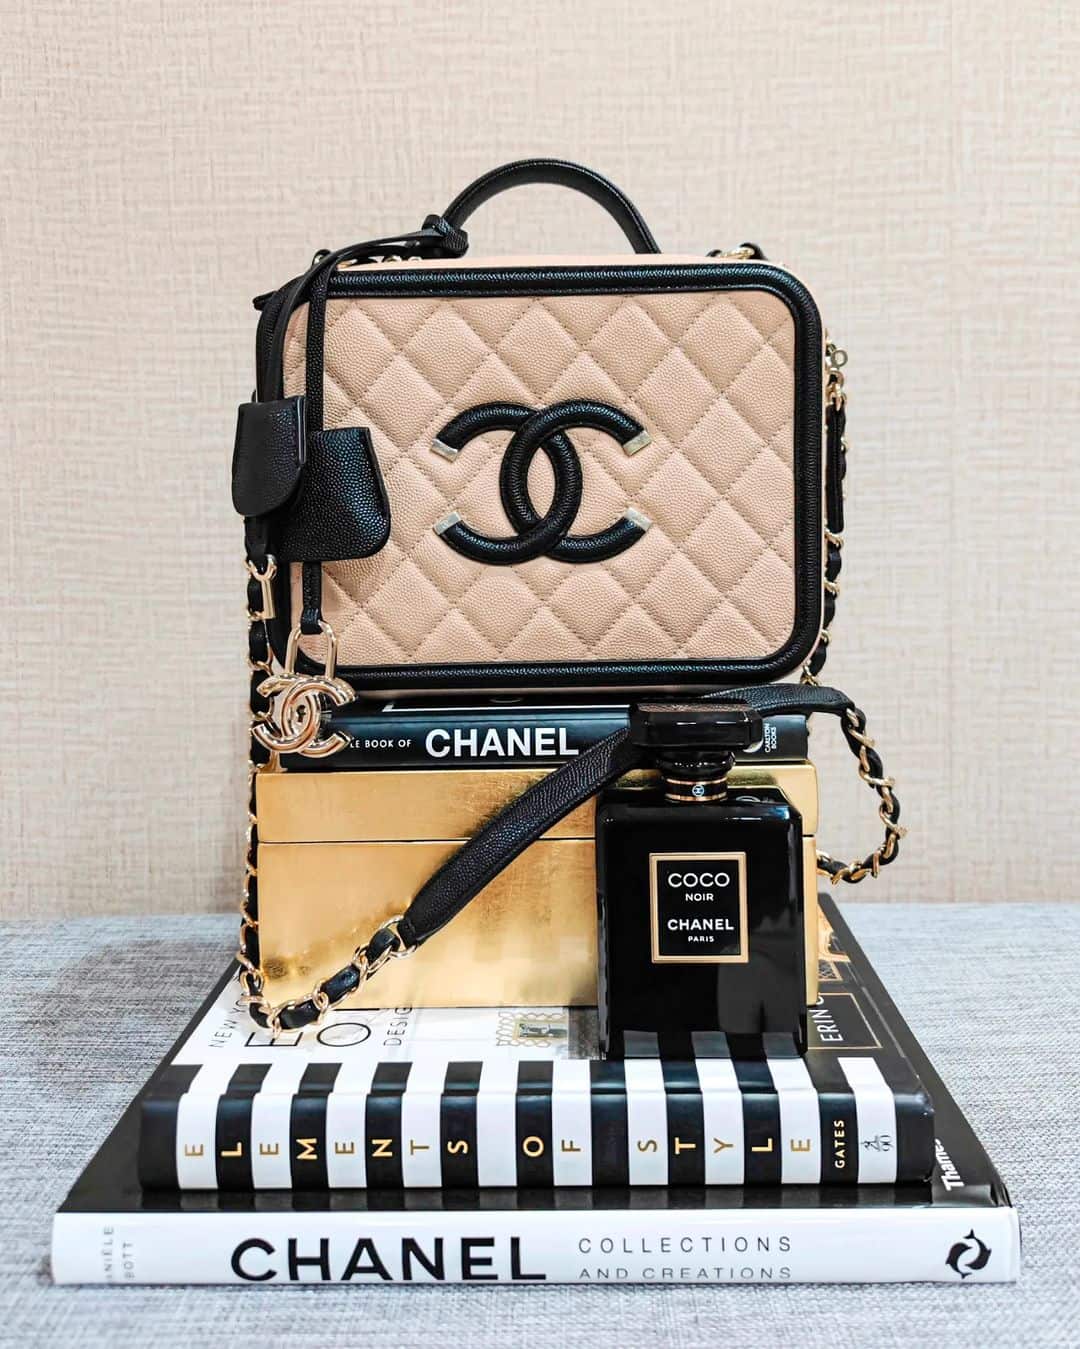 Top 10 Best CHANEL Bags of All Time